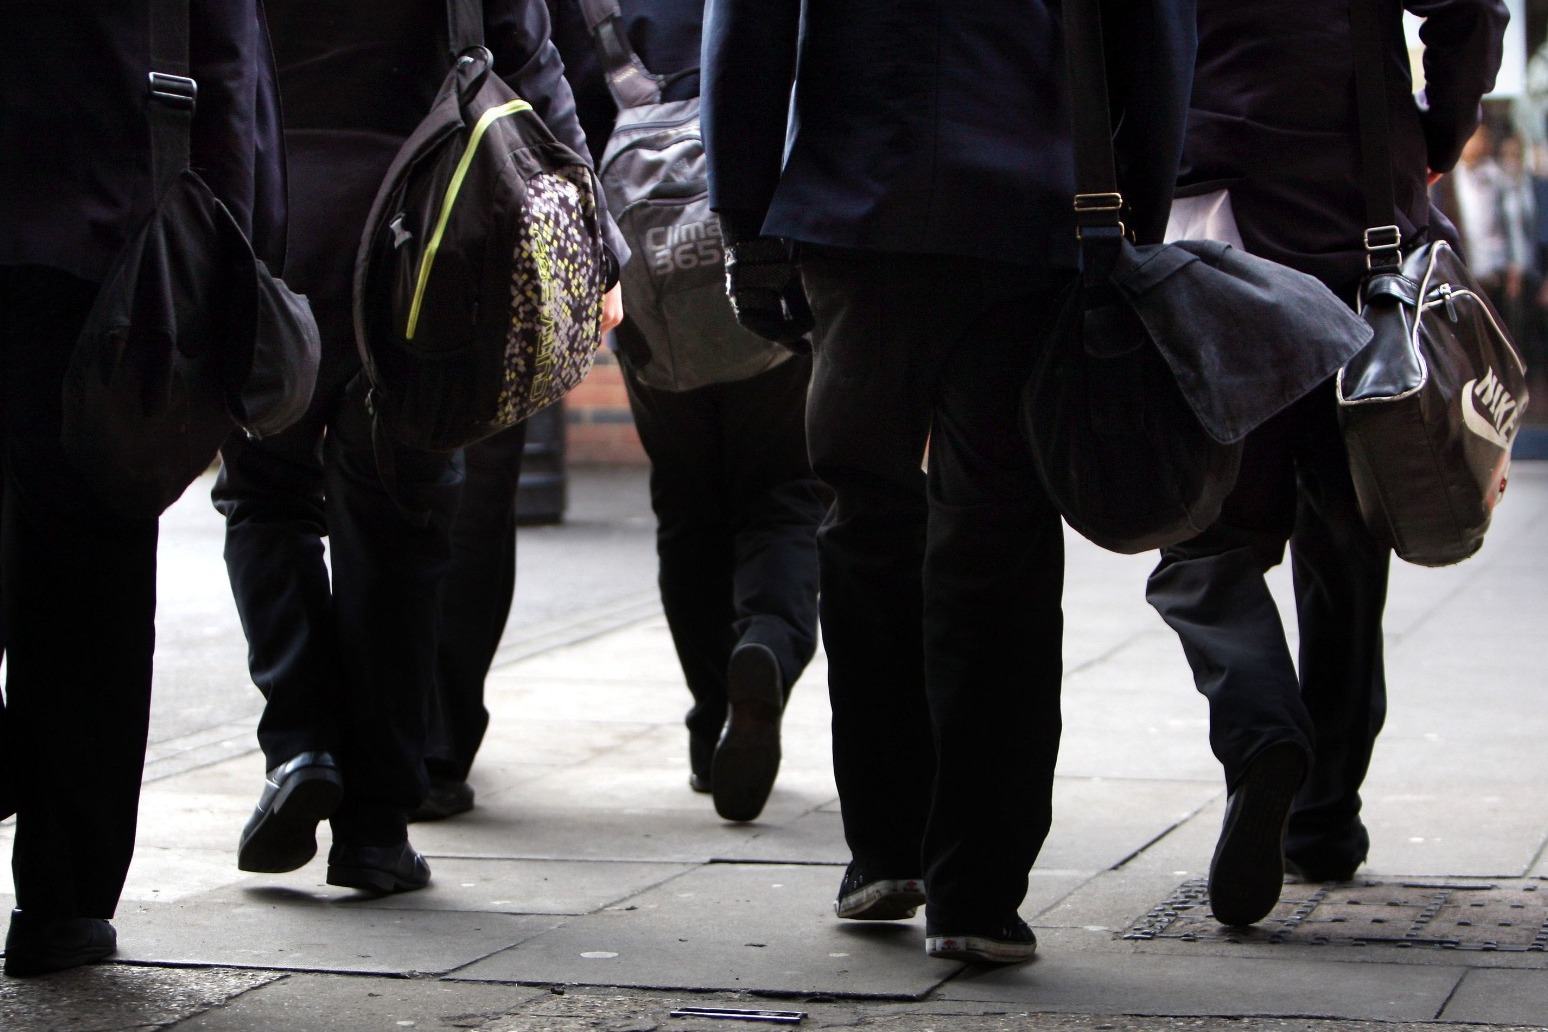 Schools in North losing hundreds of pounds per pupil compared to London – report 